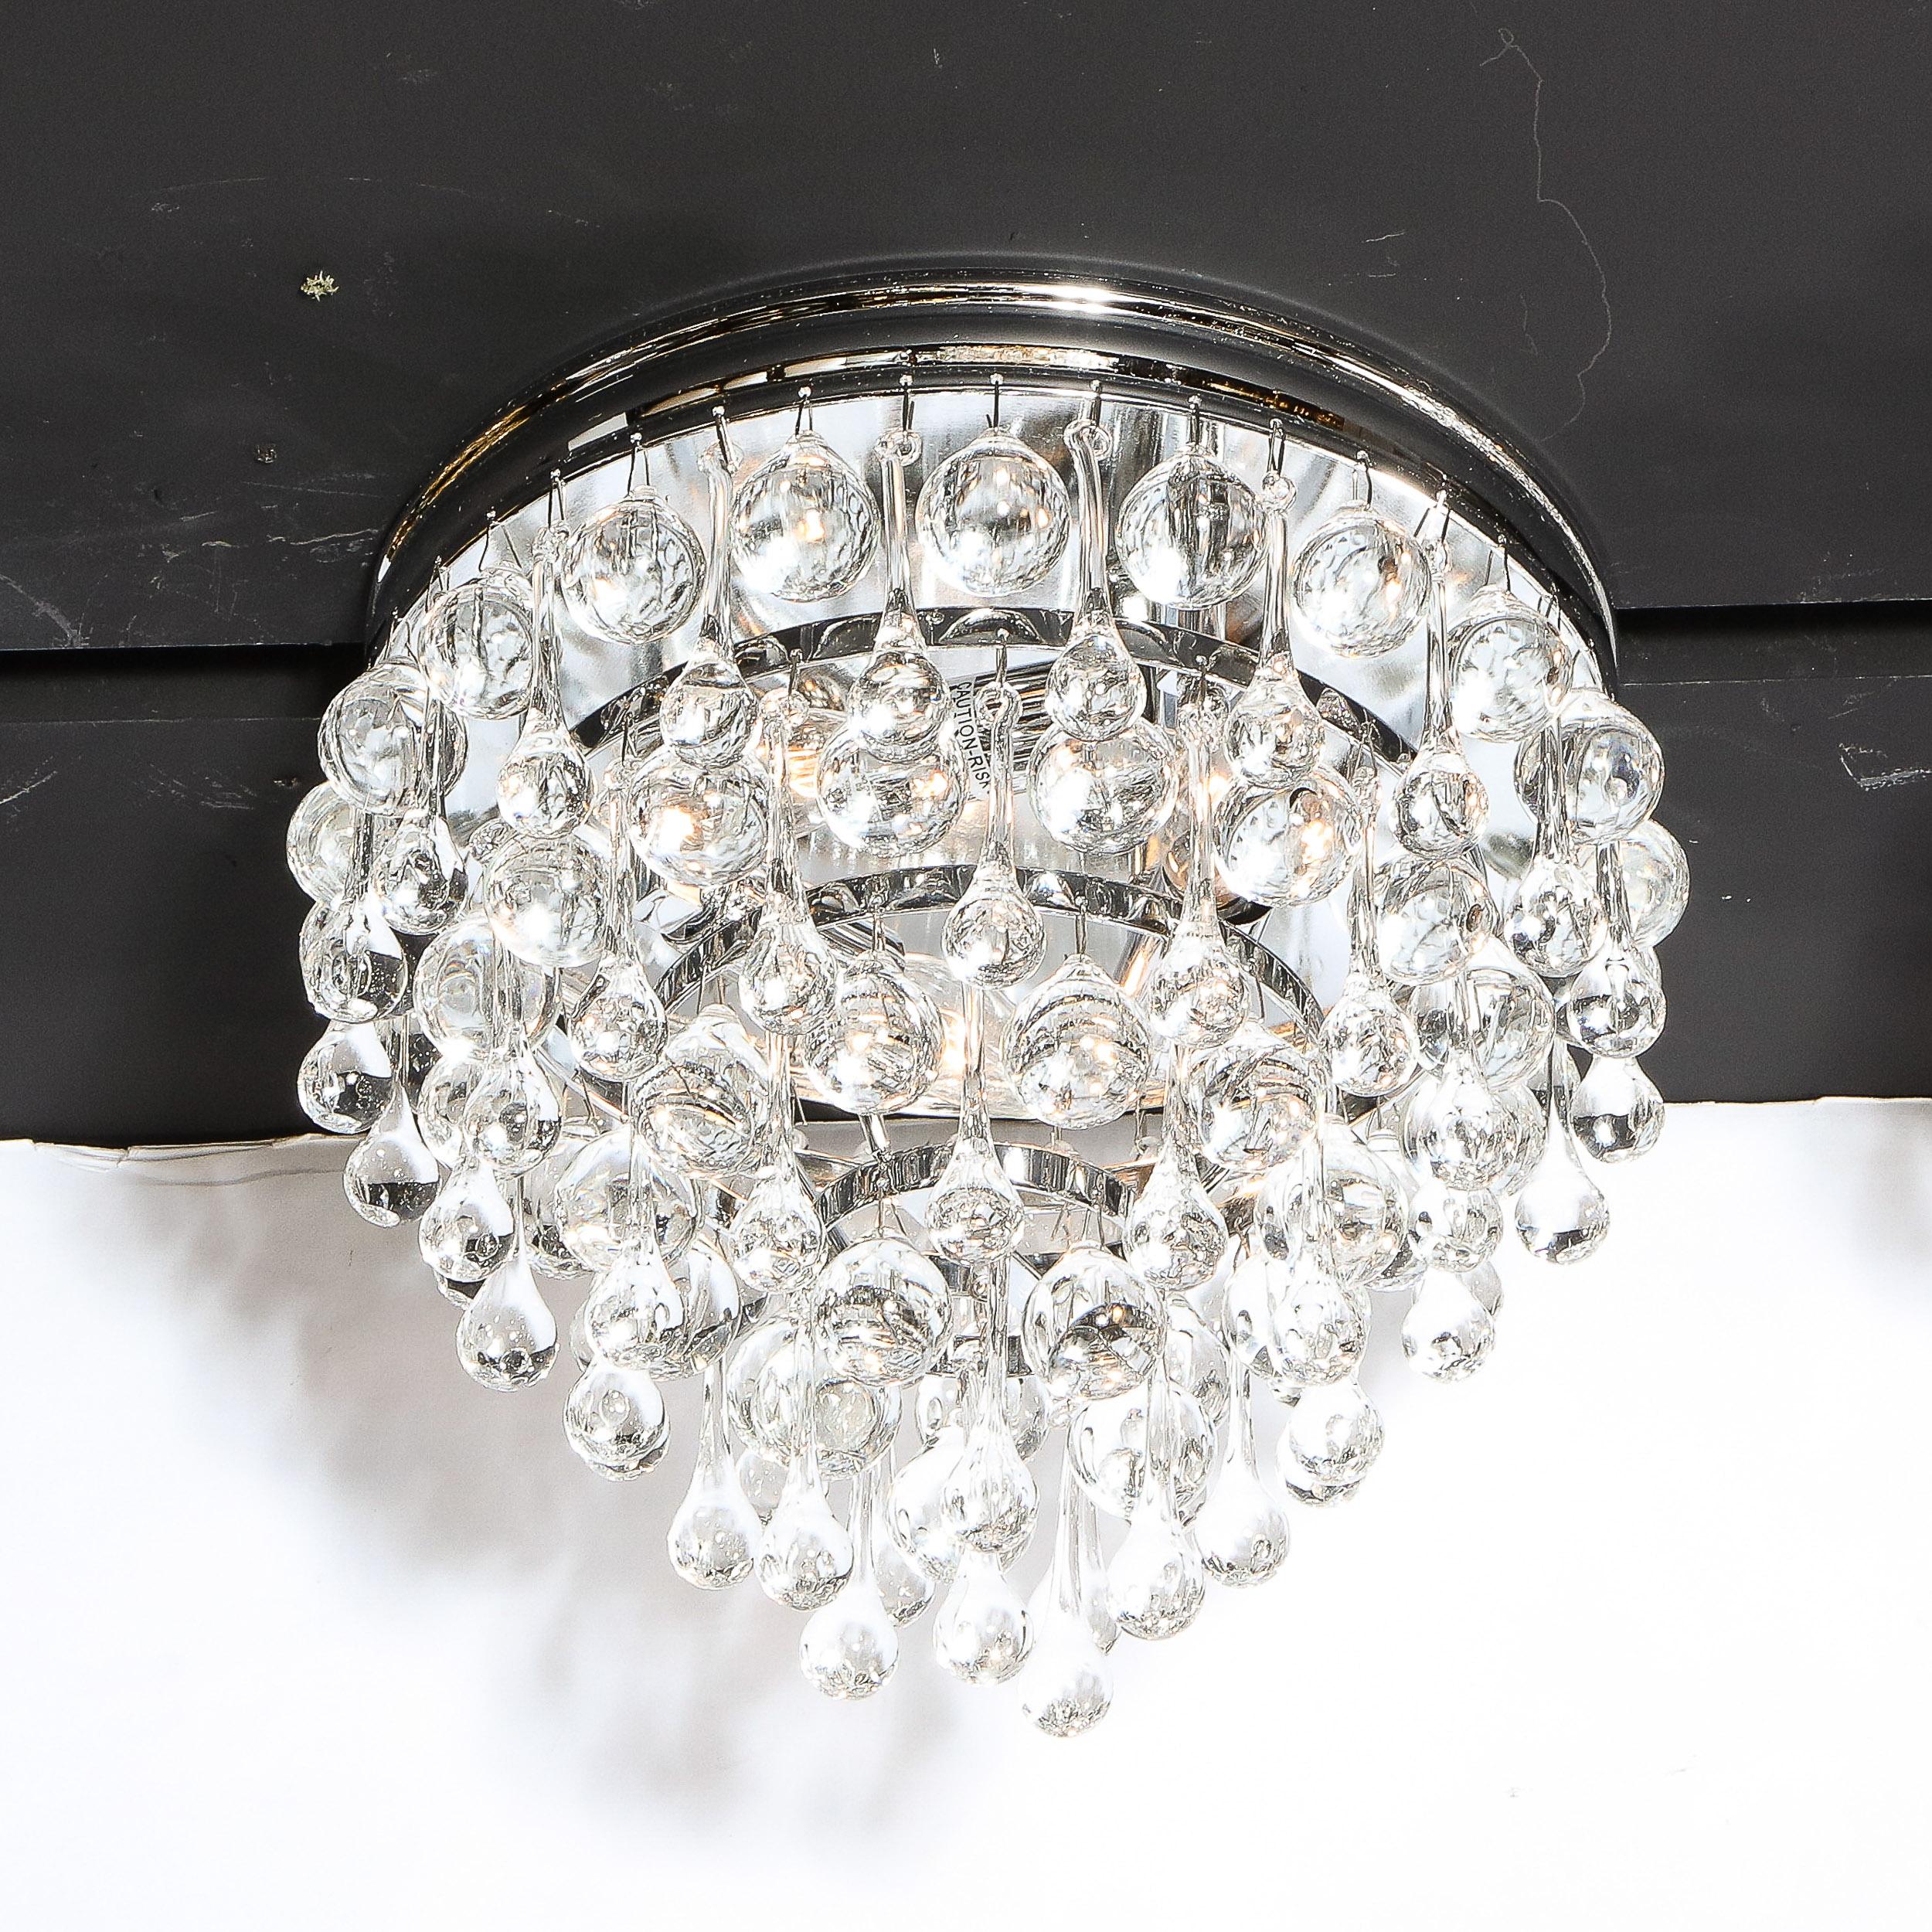 This stunning Hollywood Regency crystal teardrop flush mount chandelier features an abundance of hanging translucent glass tear drops suspended from a polished chrome frame consisting of six graduated concentric circular rows- imbuing the piece with